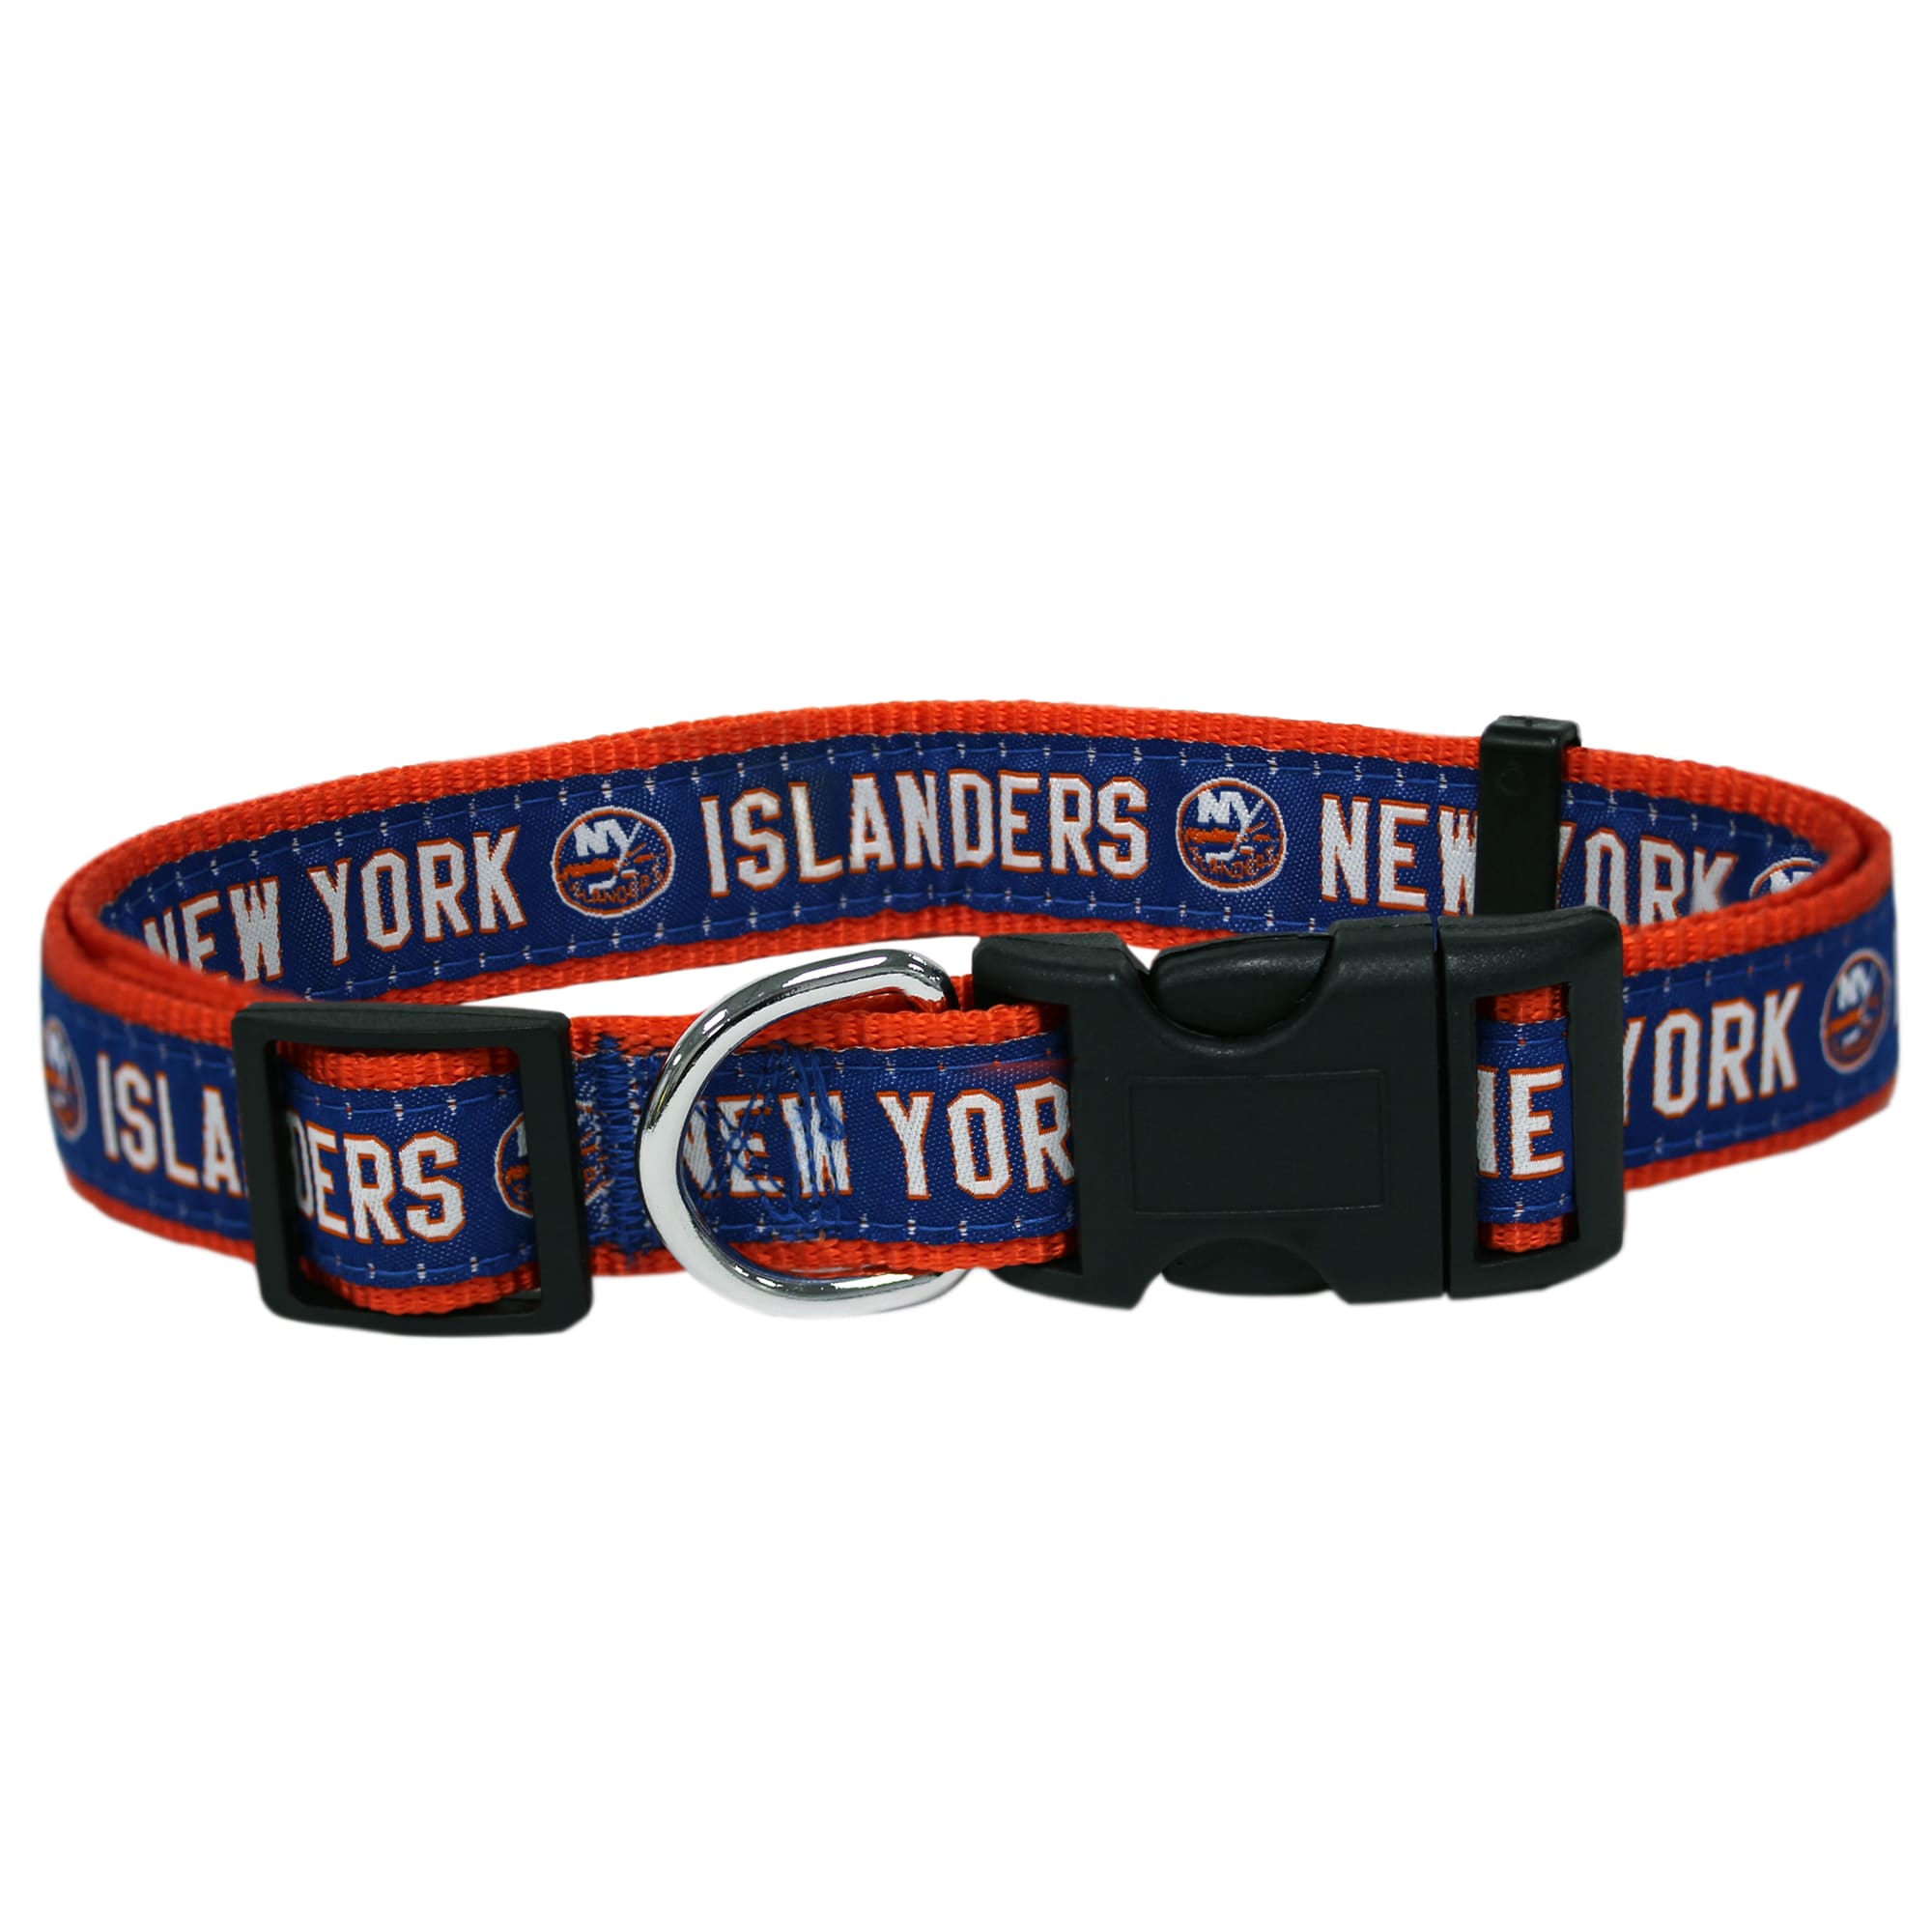 Photos - Collar / Harnesses Pets First New York Islanders Dog Collar, Small, Multi-Color IS 